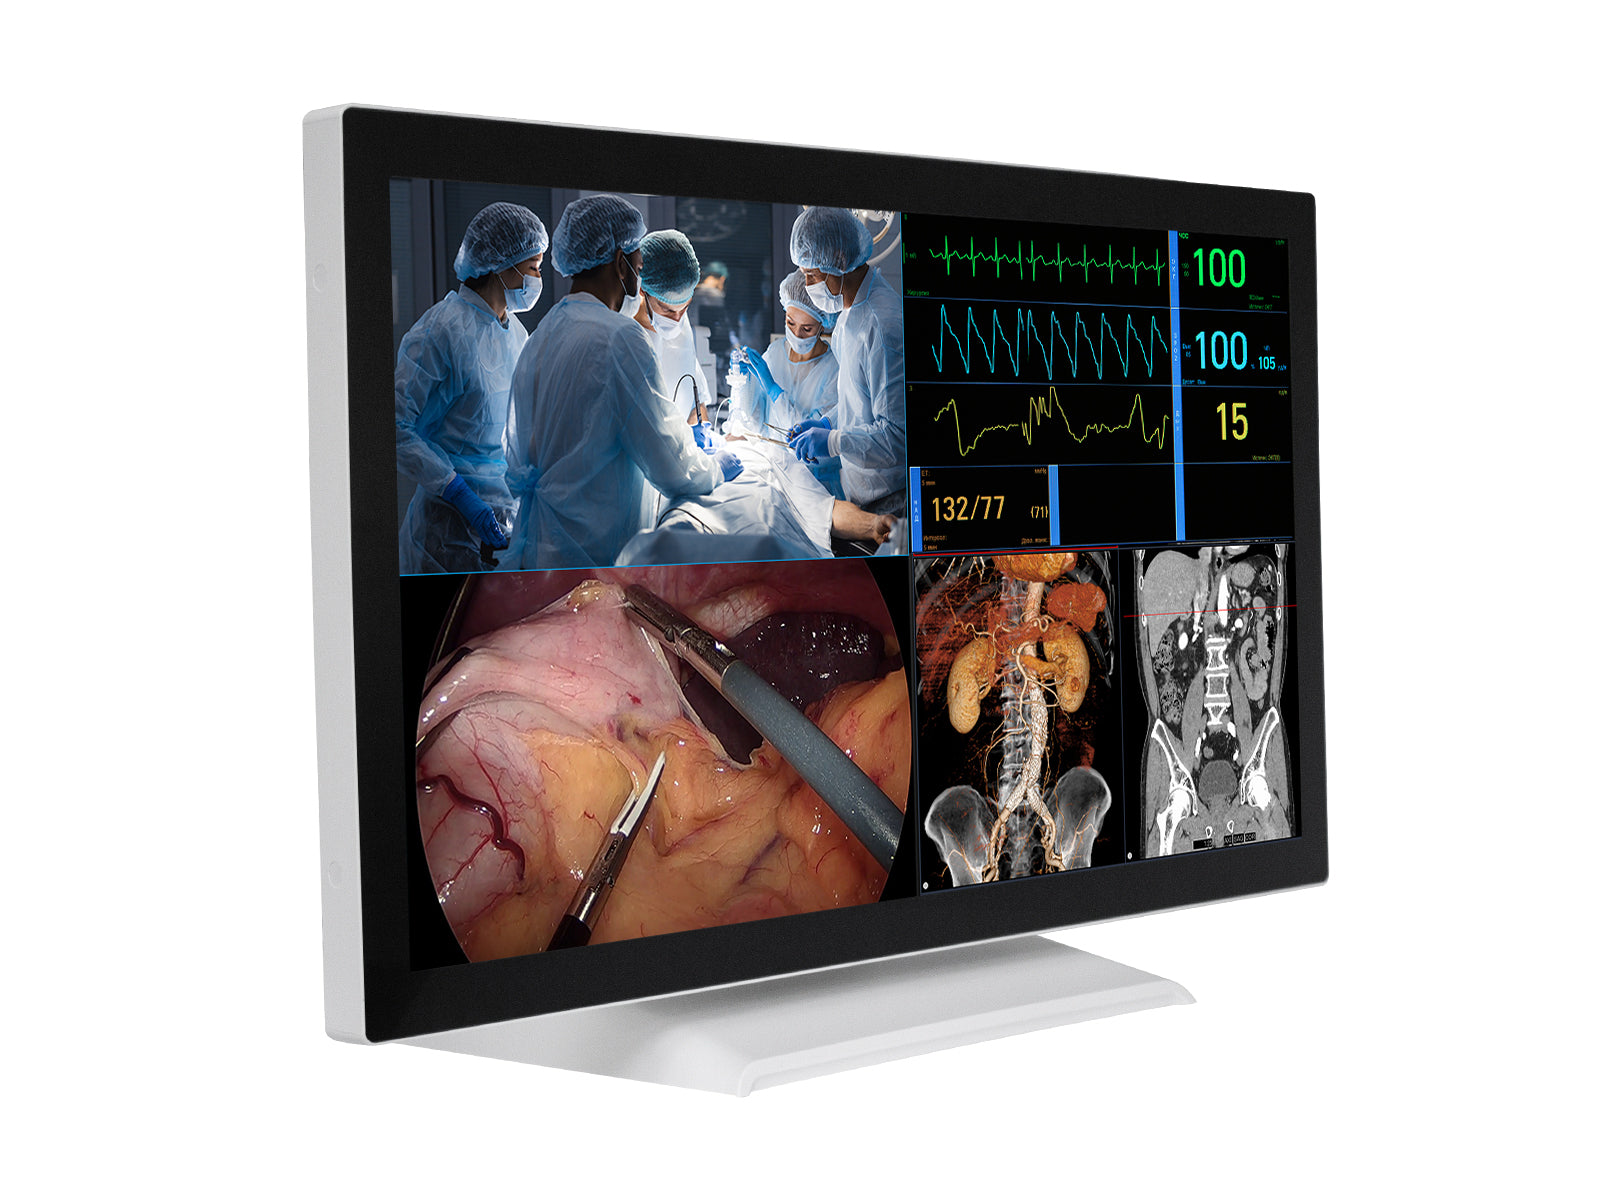 Barco AMM 215WTTP 21.5” Full HD Touchscreen Color Clinical Review Display Monitor Monitors.com 